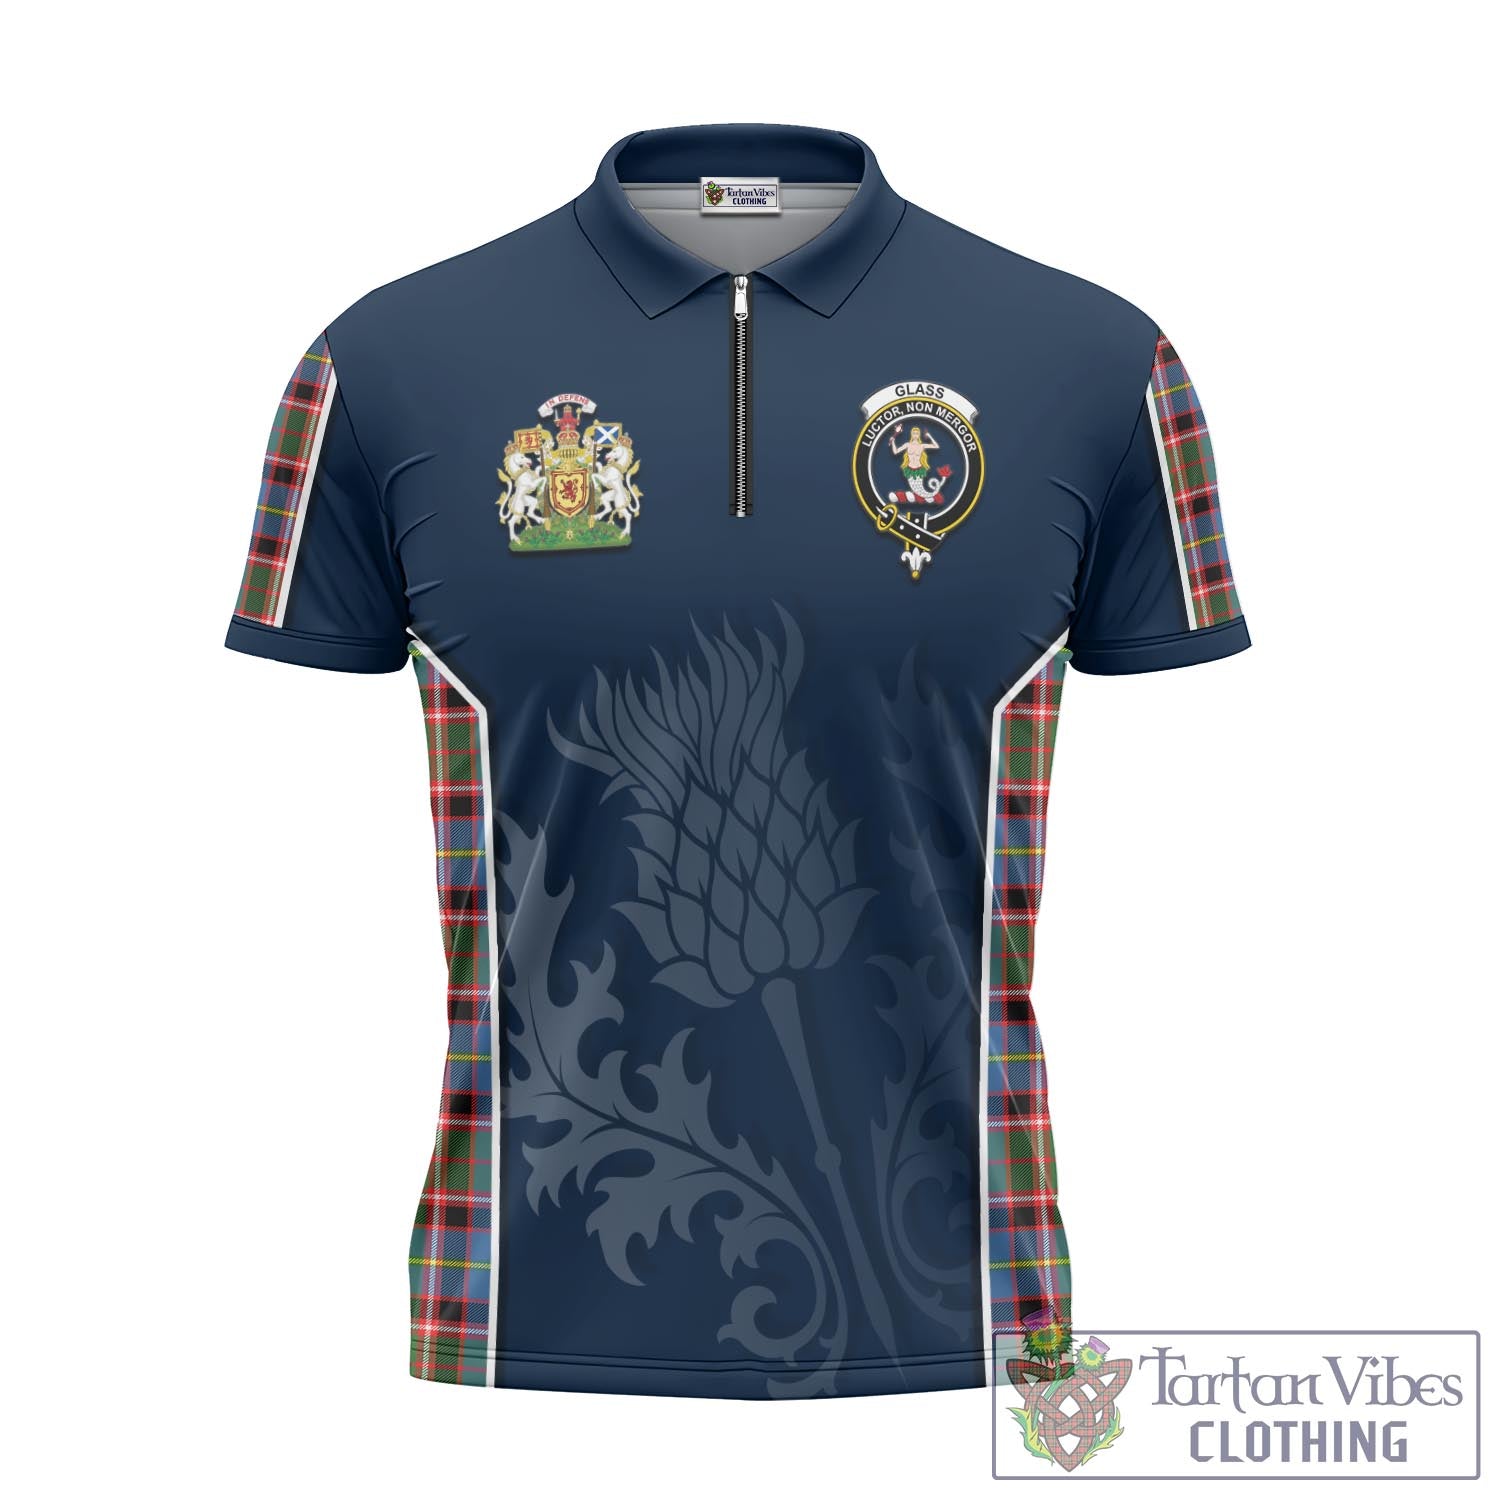 Tartan Vibes Clothing Glass Tartan Zipper Polo Shirt with Family Crest and Scottish Thistle Vibes Sport Style